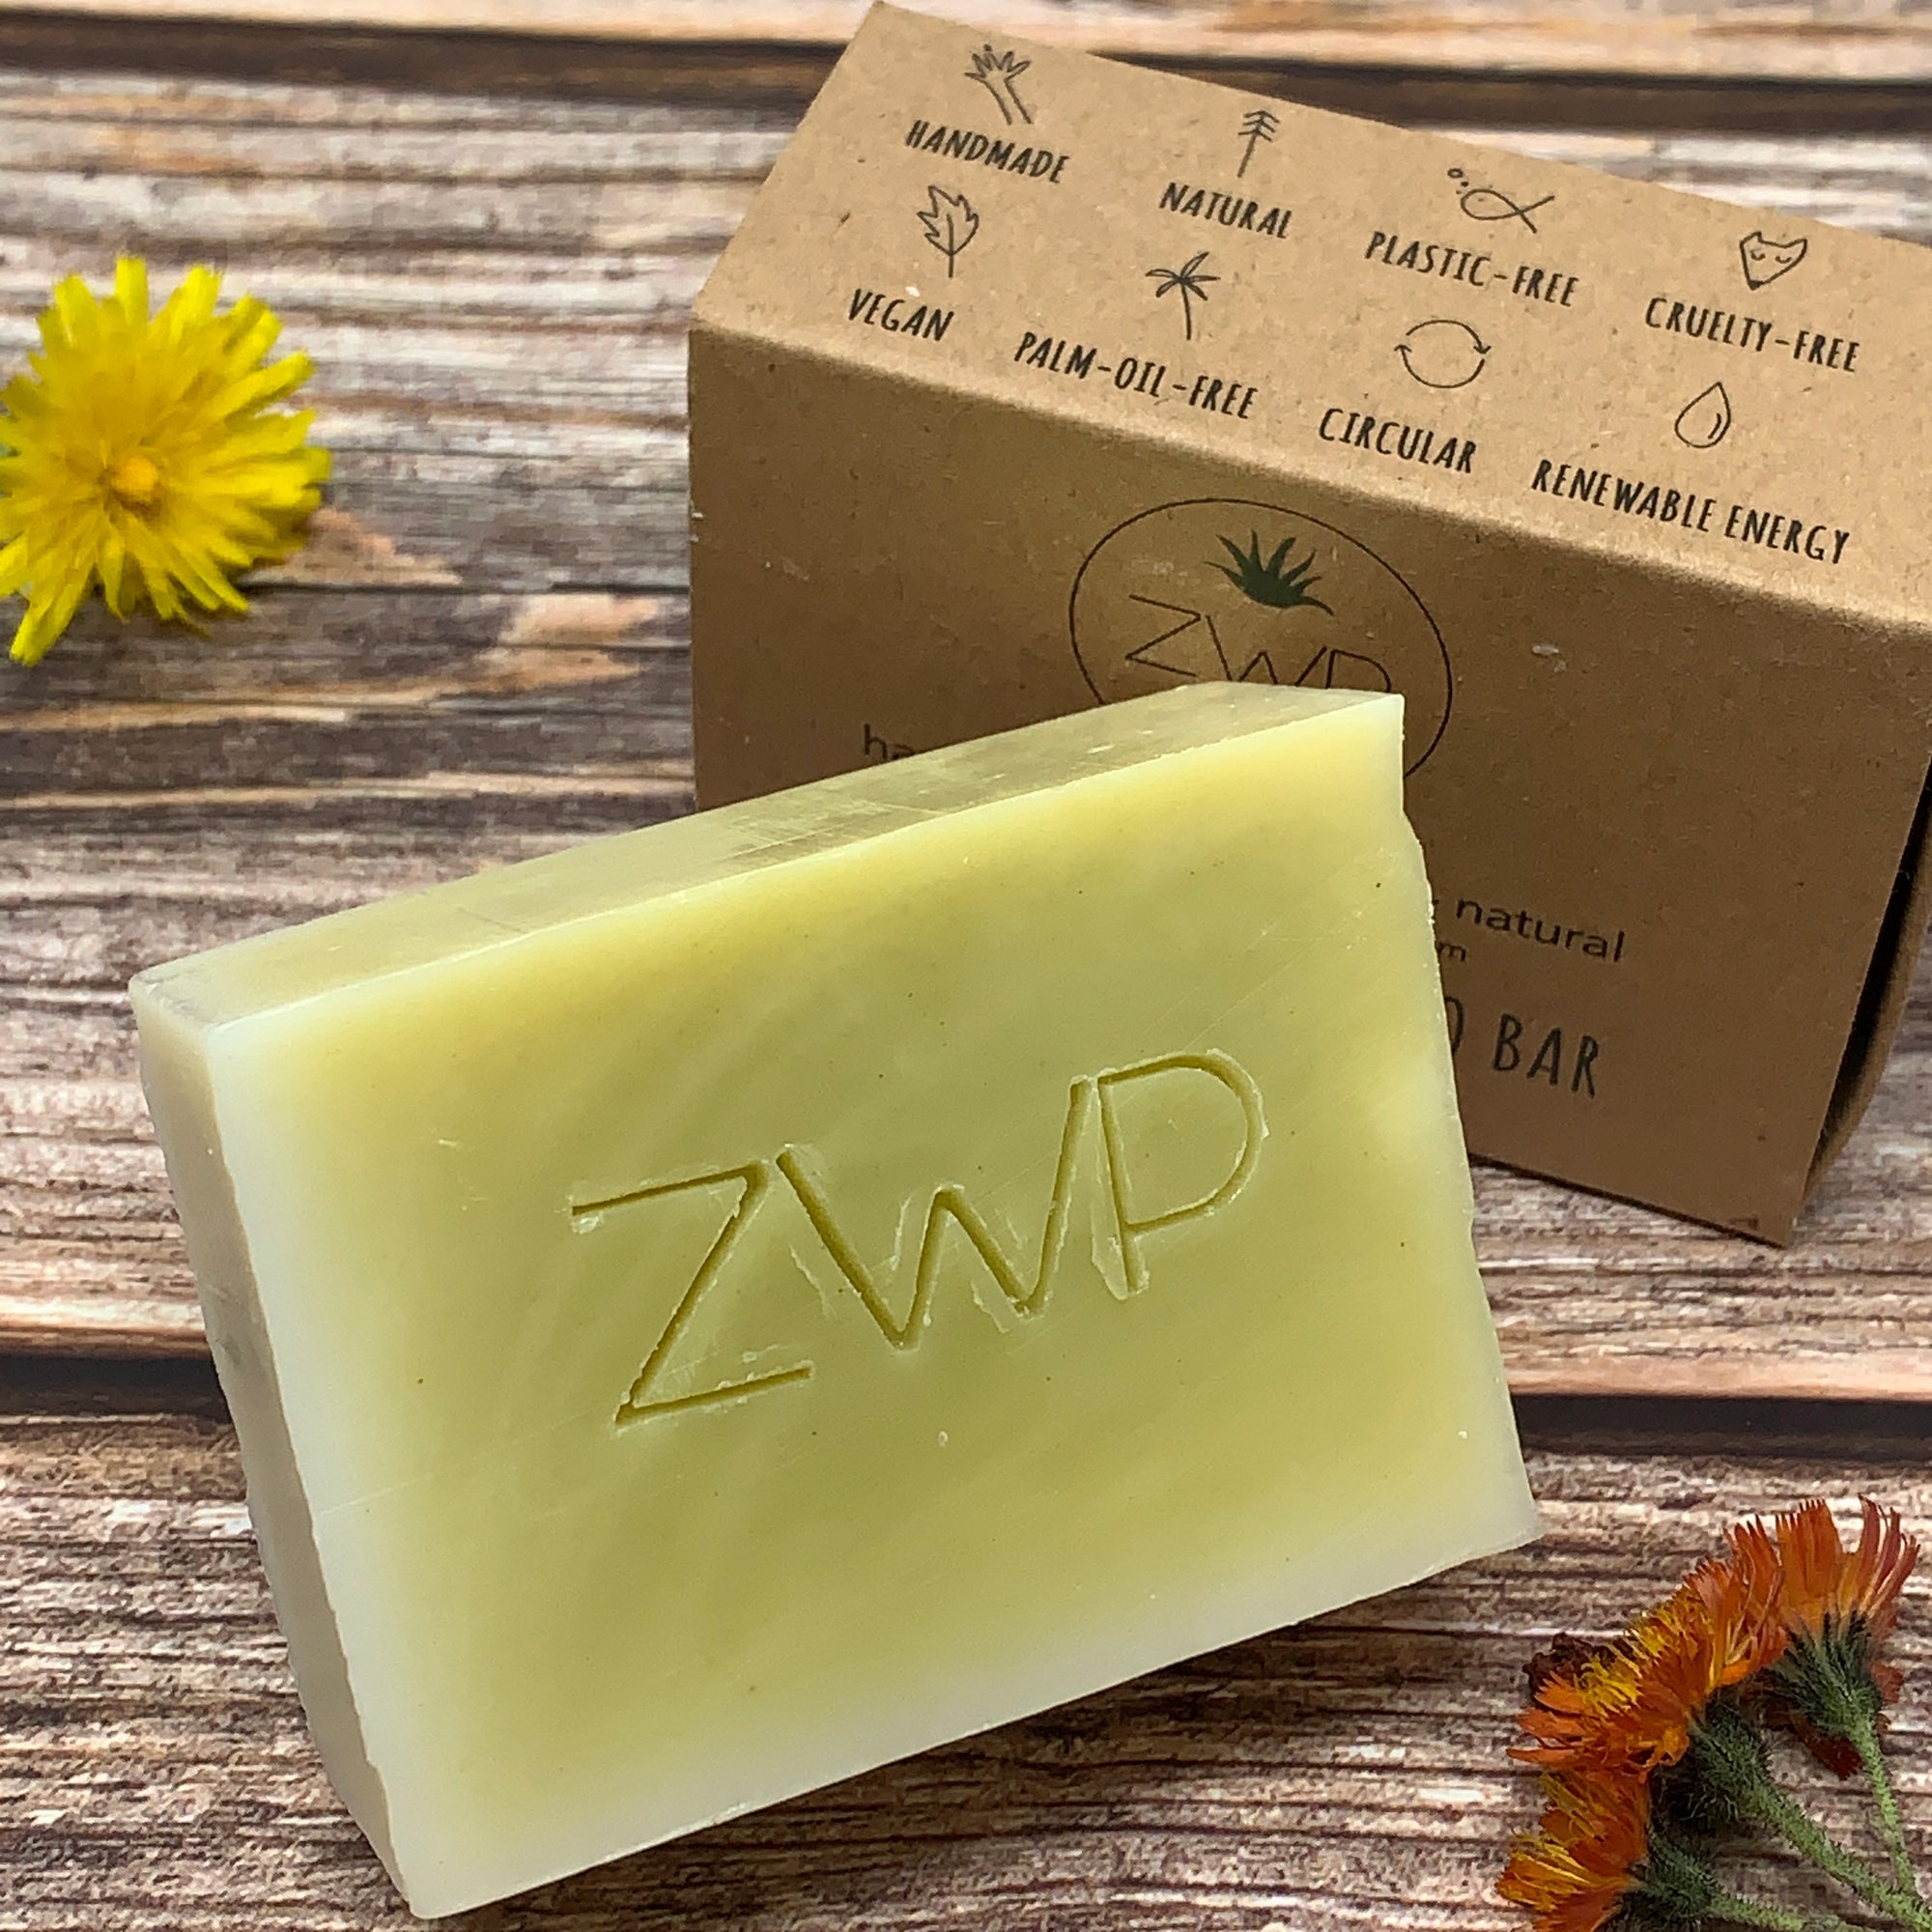 solid yellow shampoo bar with ZWP logo engraved  and brown box without plastic